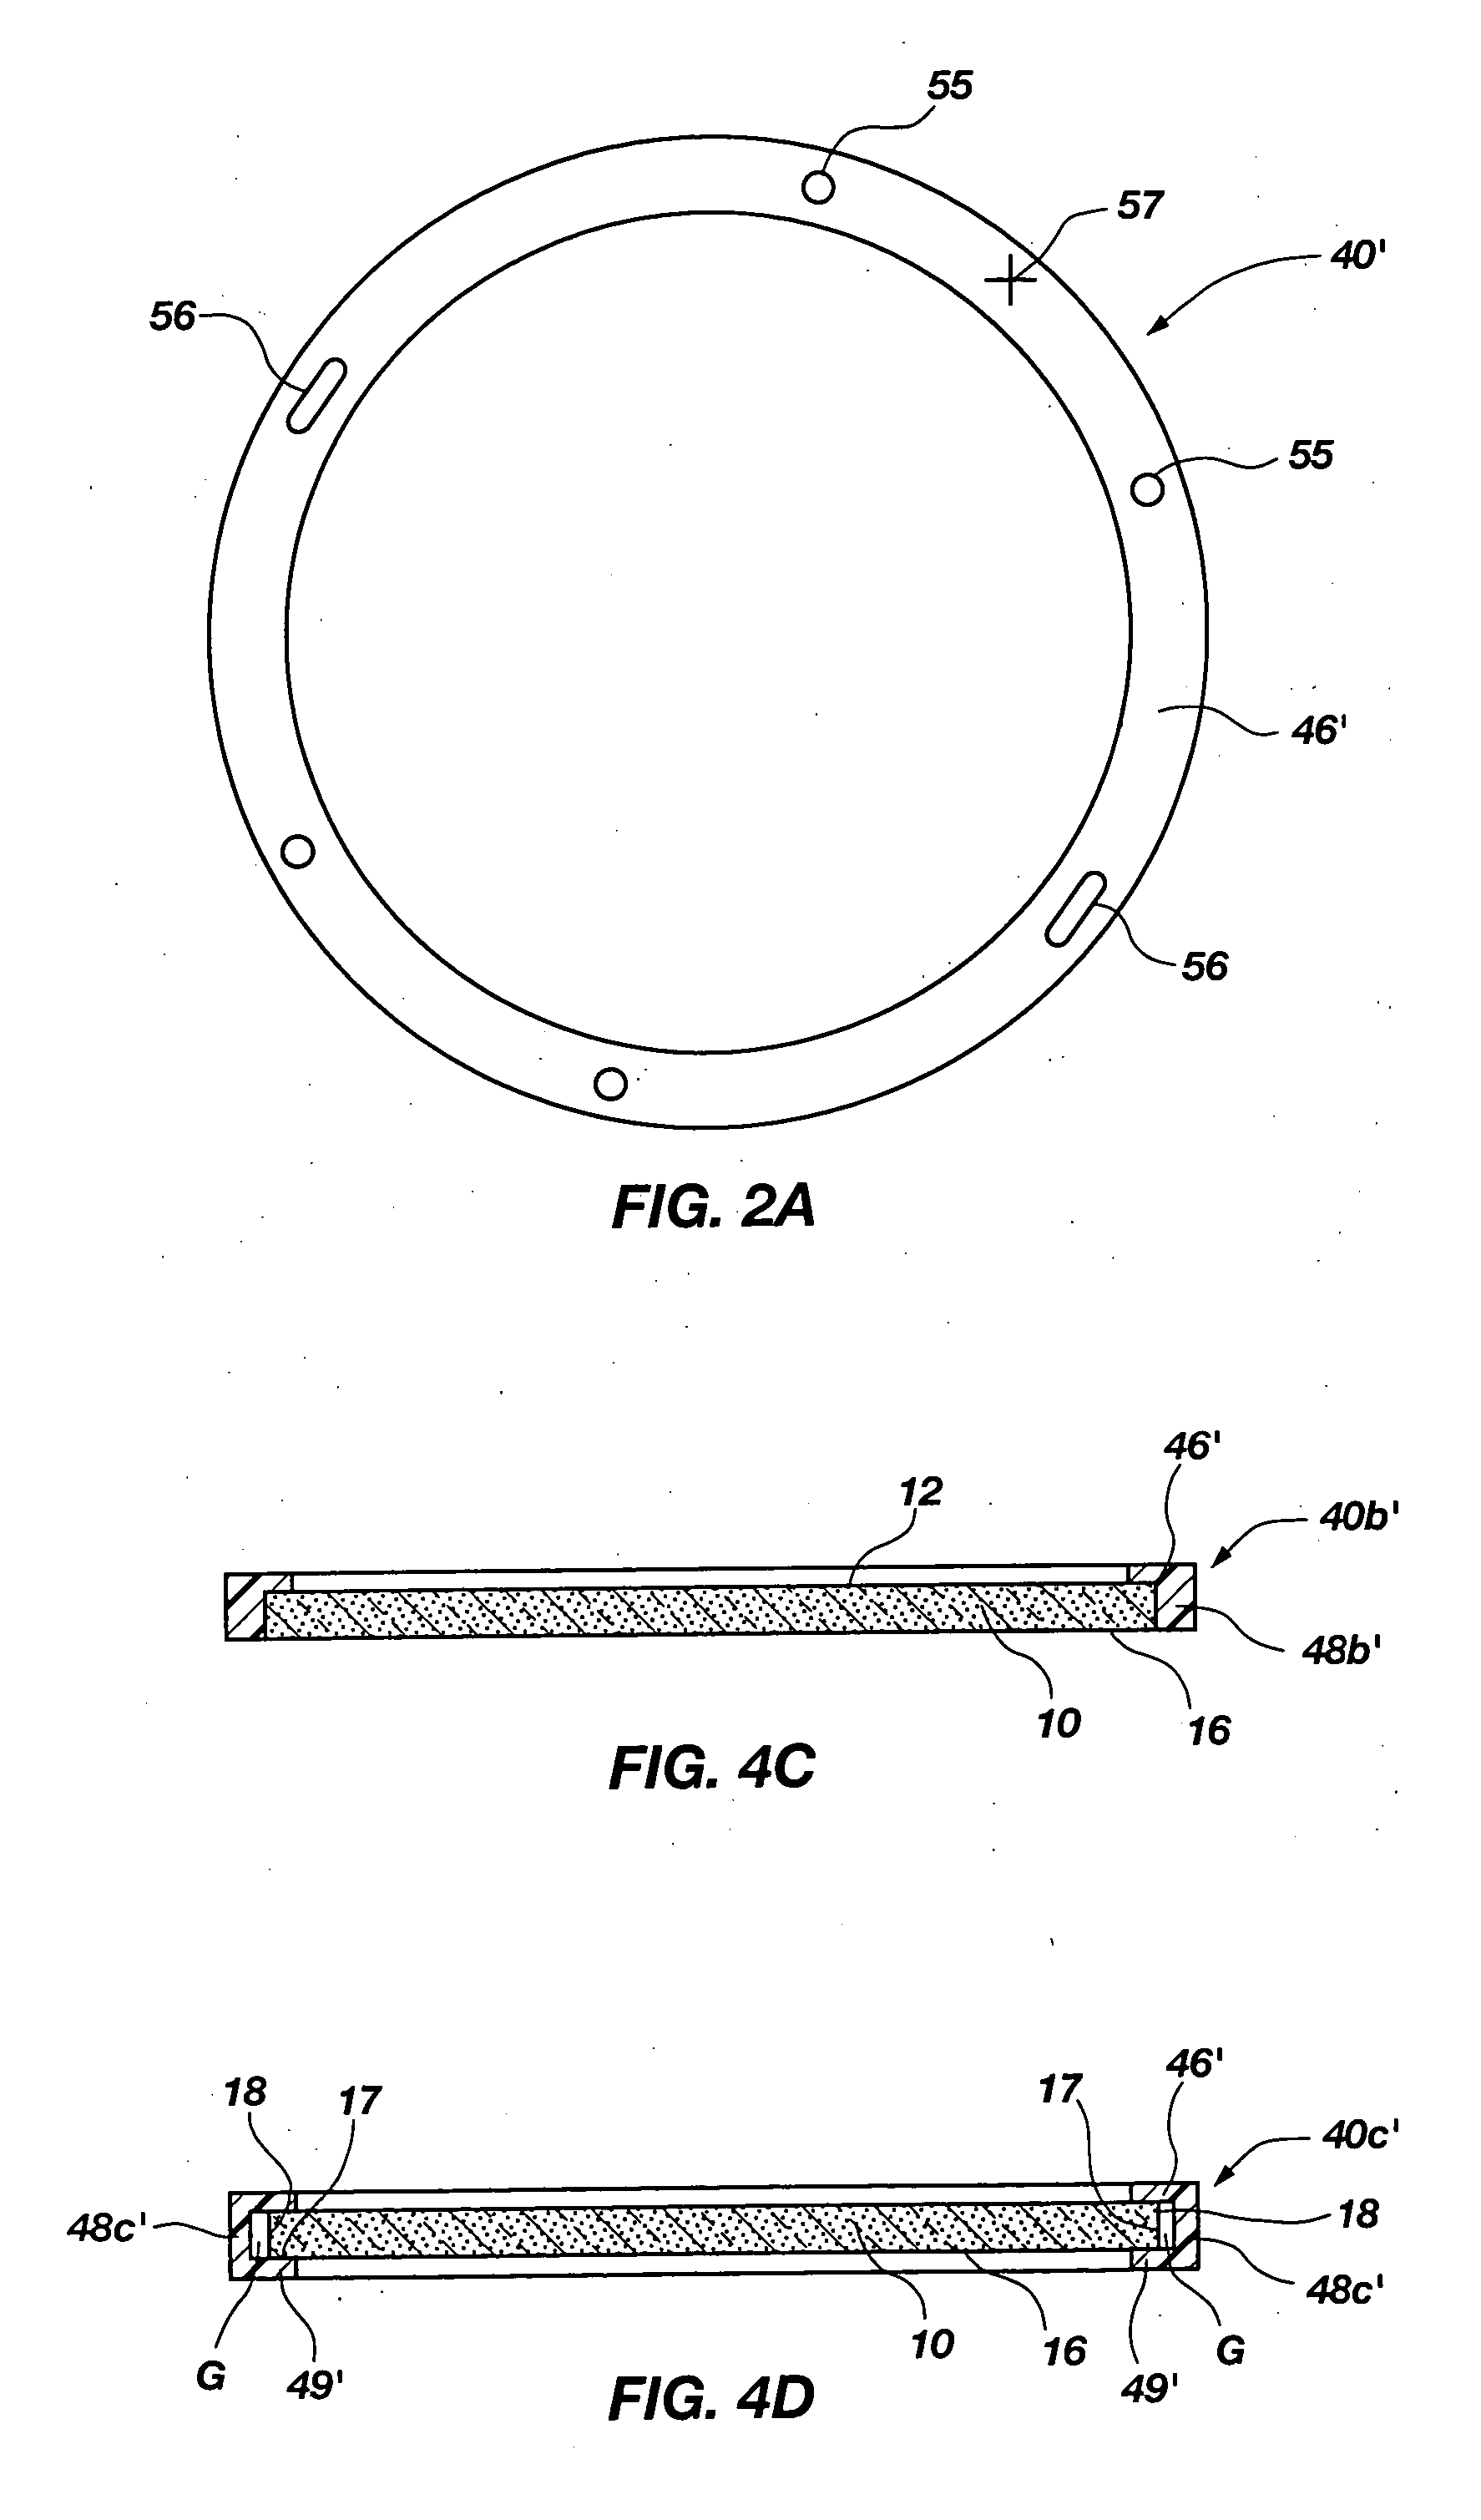 Support structure for thinning semiconductor substrates and thinning methods employing the support structure